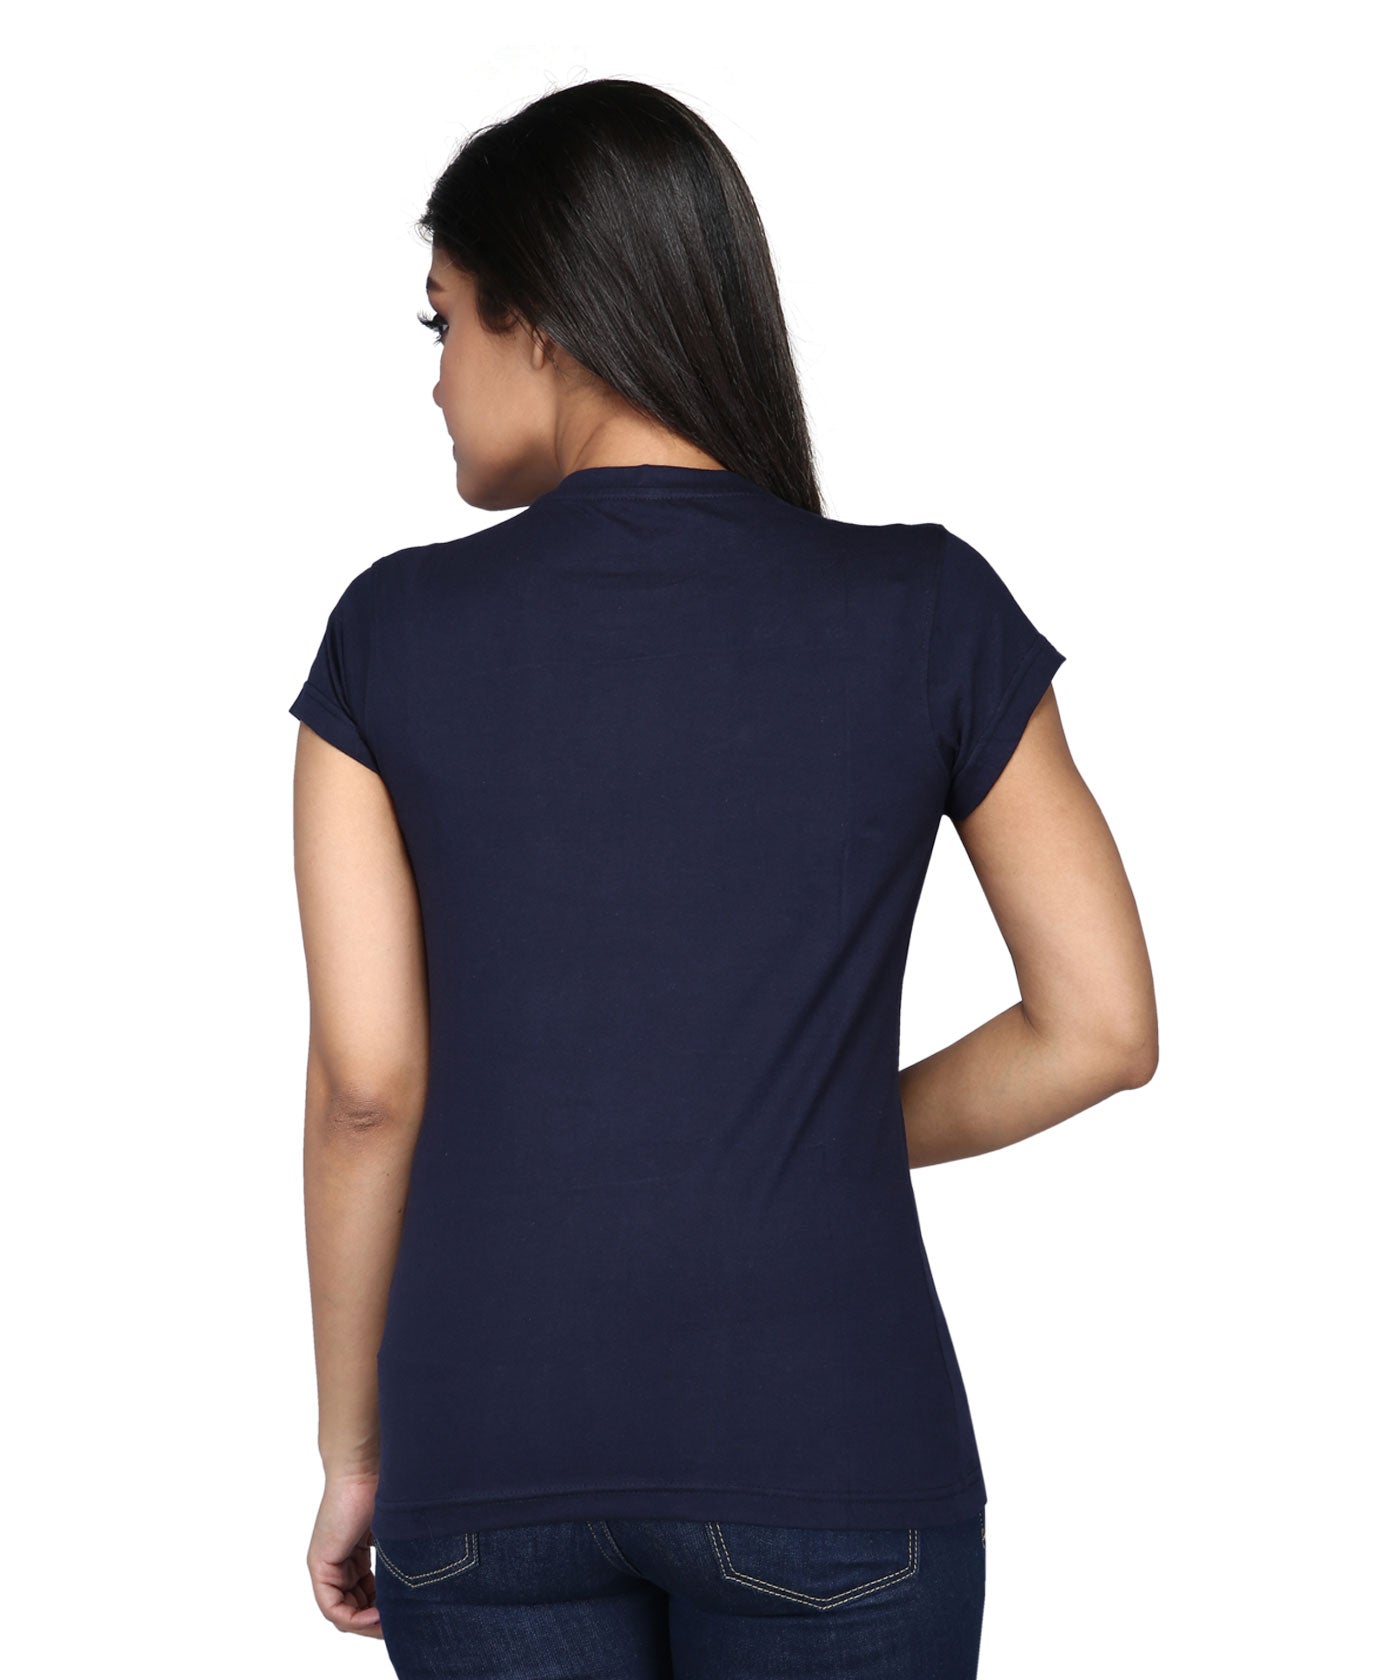 Too Glam To Give A Damn - Premium Round Neck Cotton Tees for Women - Navy Blue